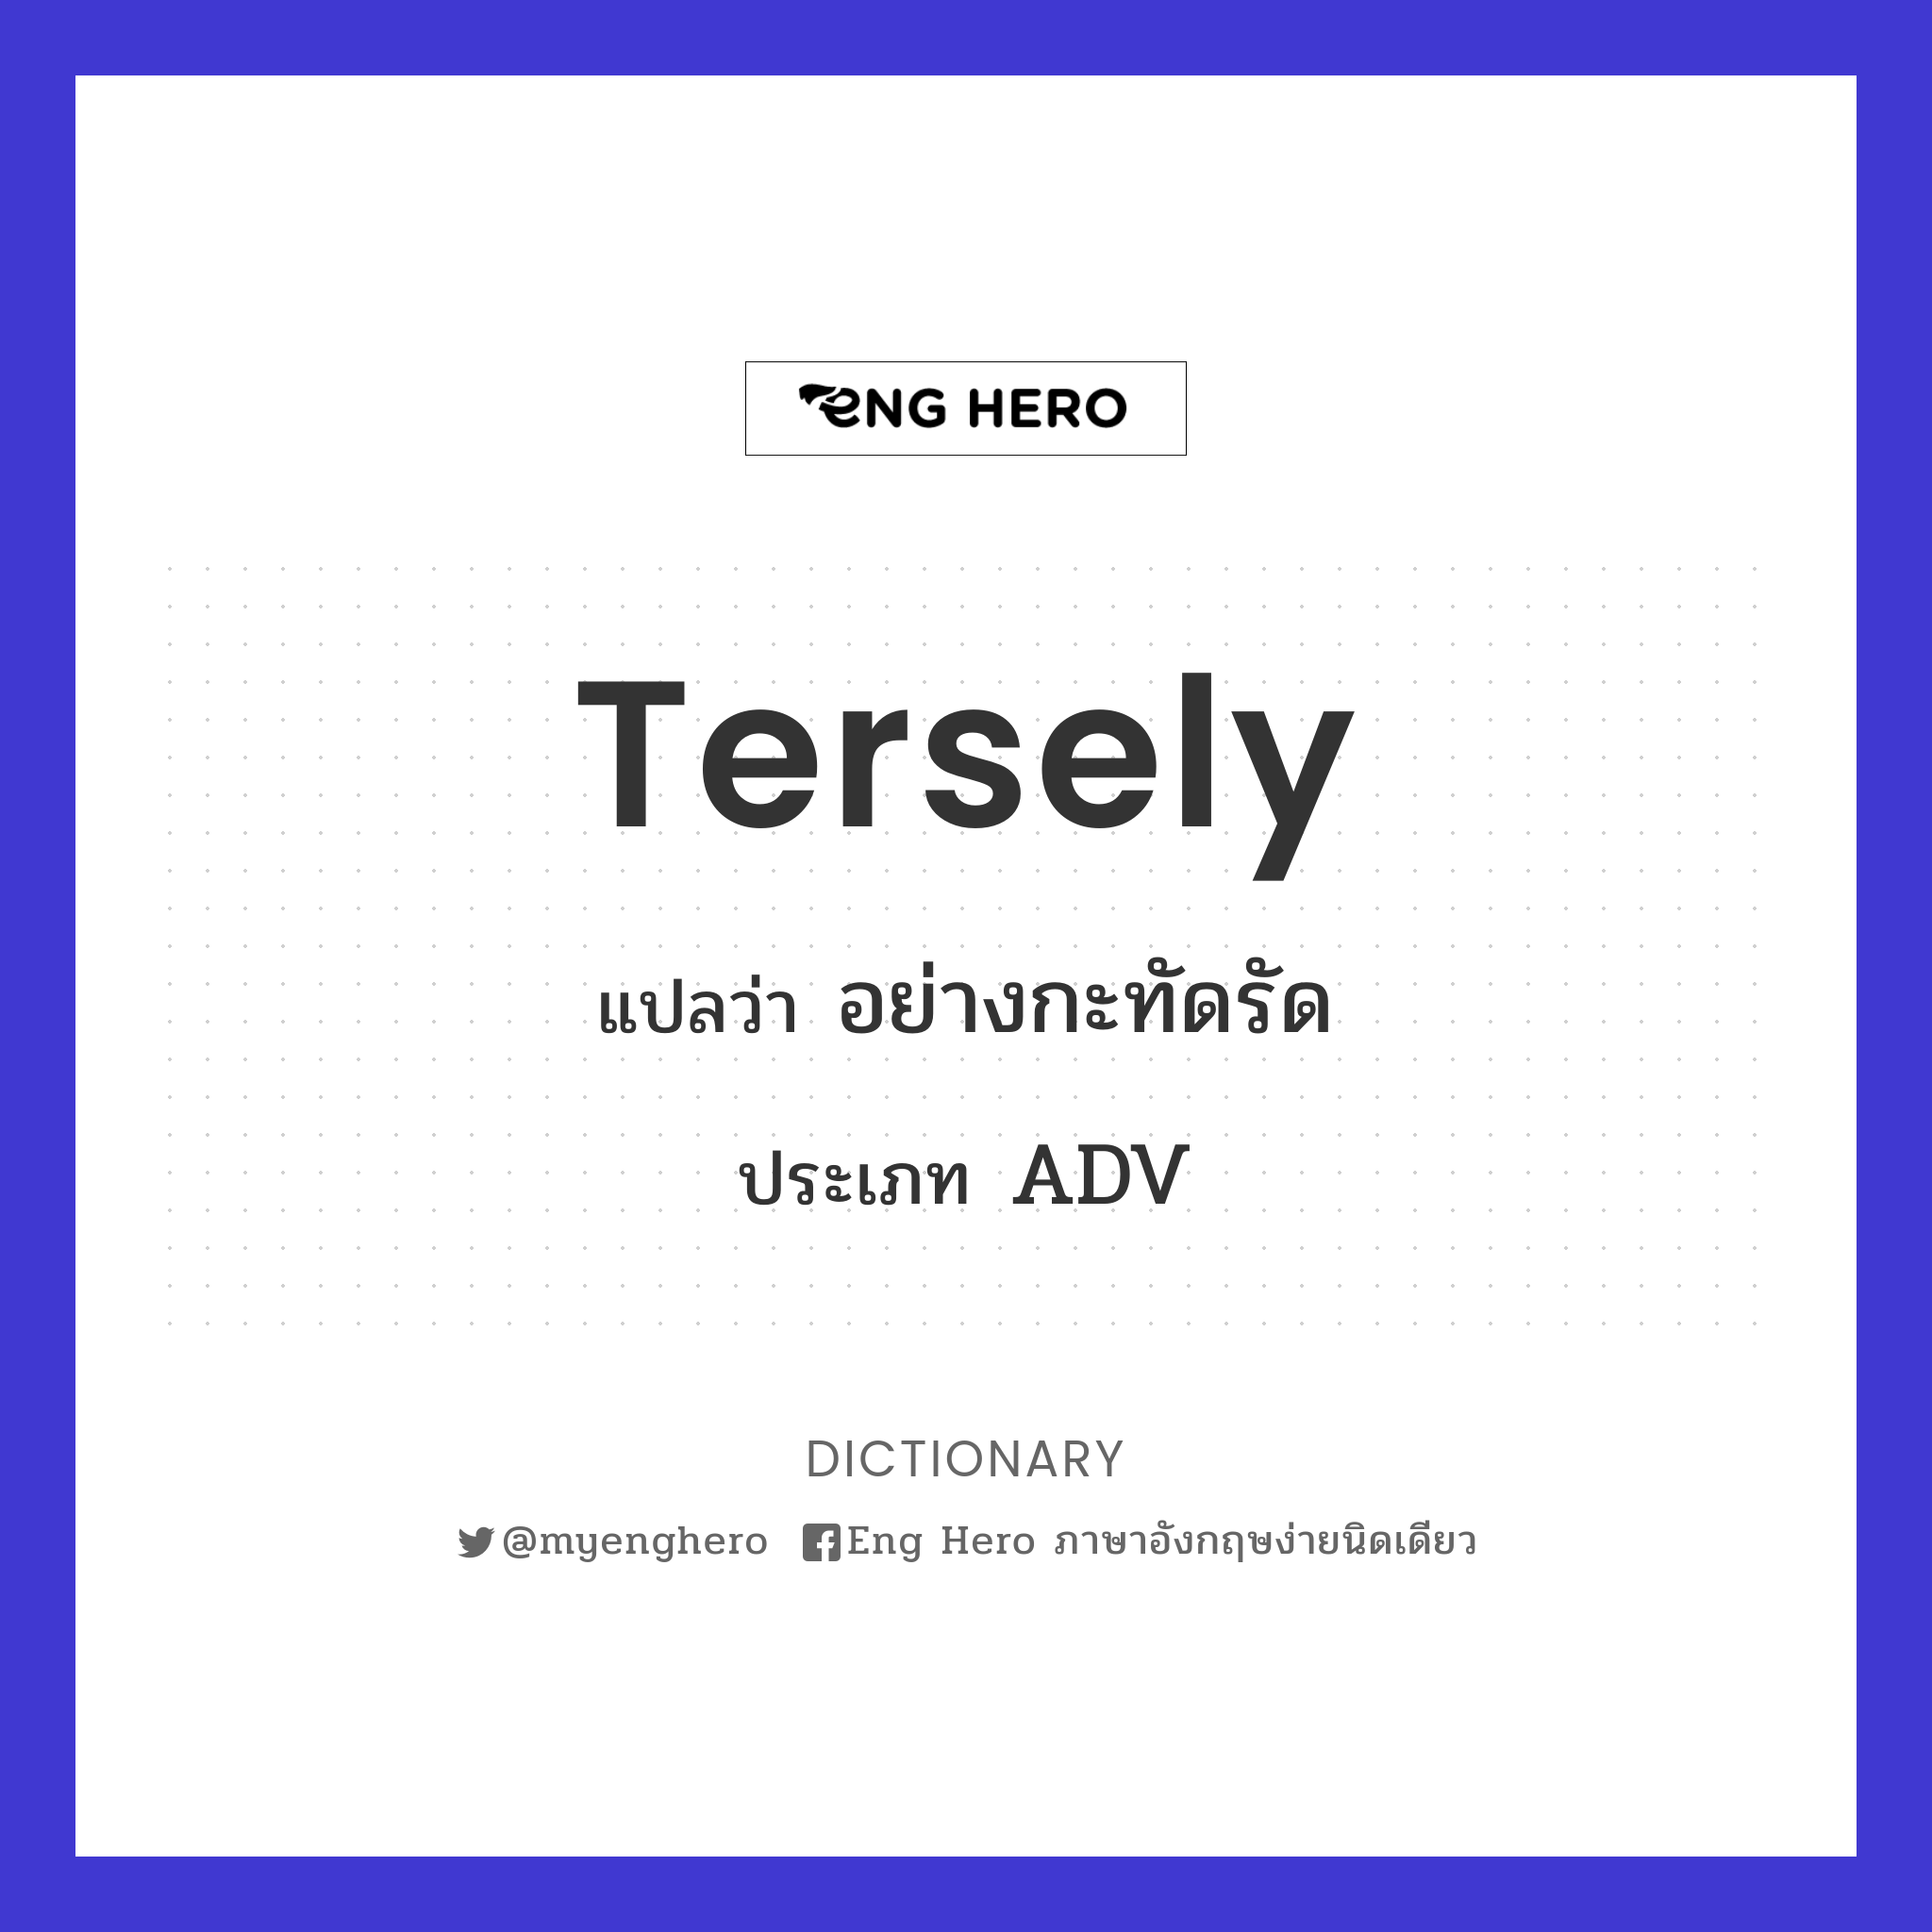 tersely